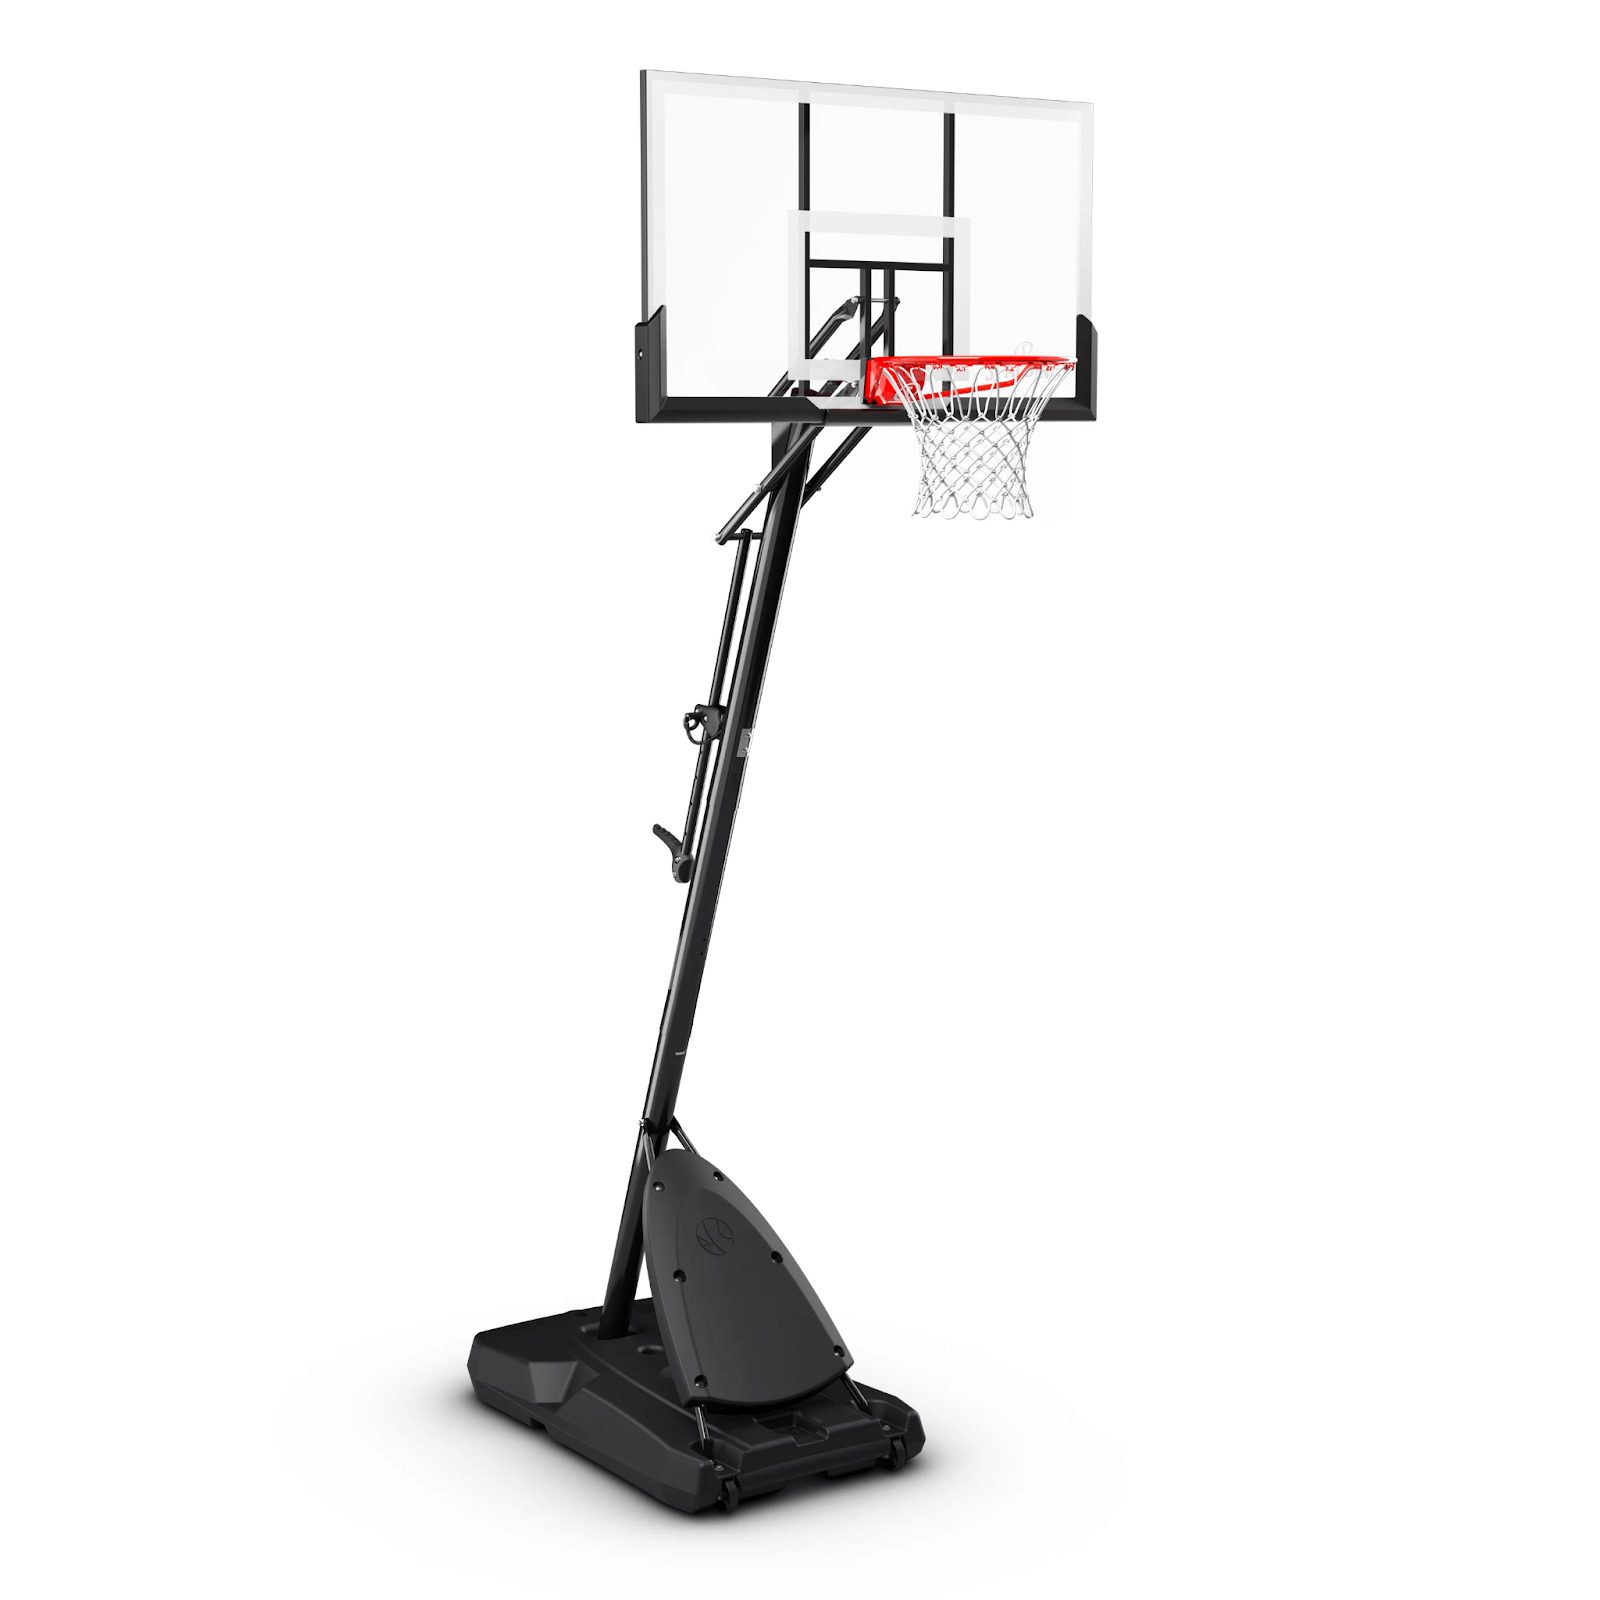 Spalding hoops feature 4 x 4-inch poles for addility